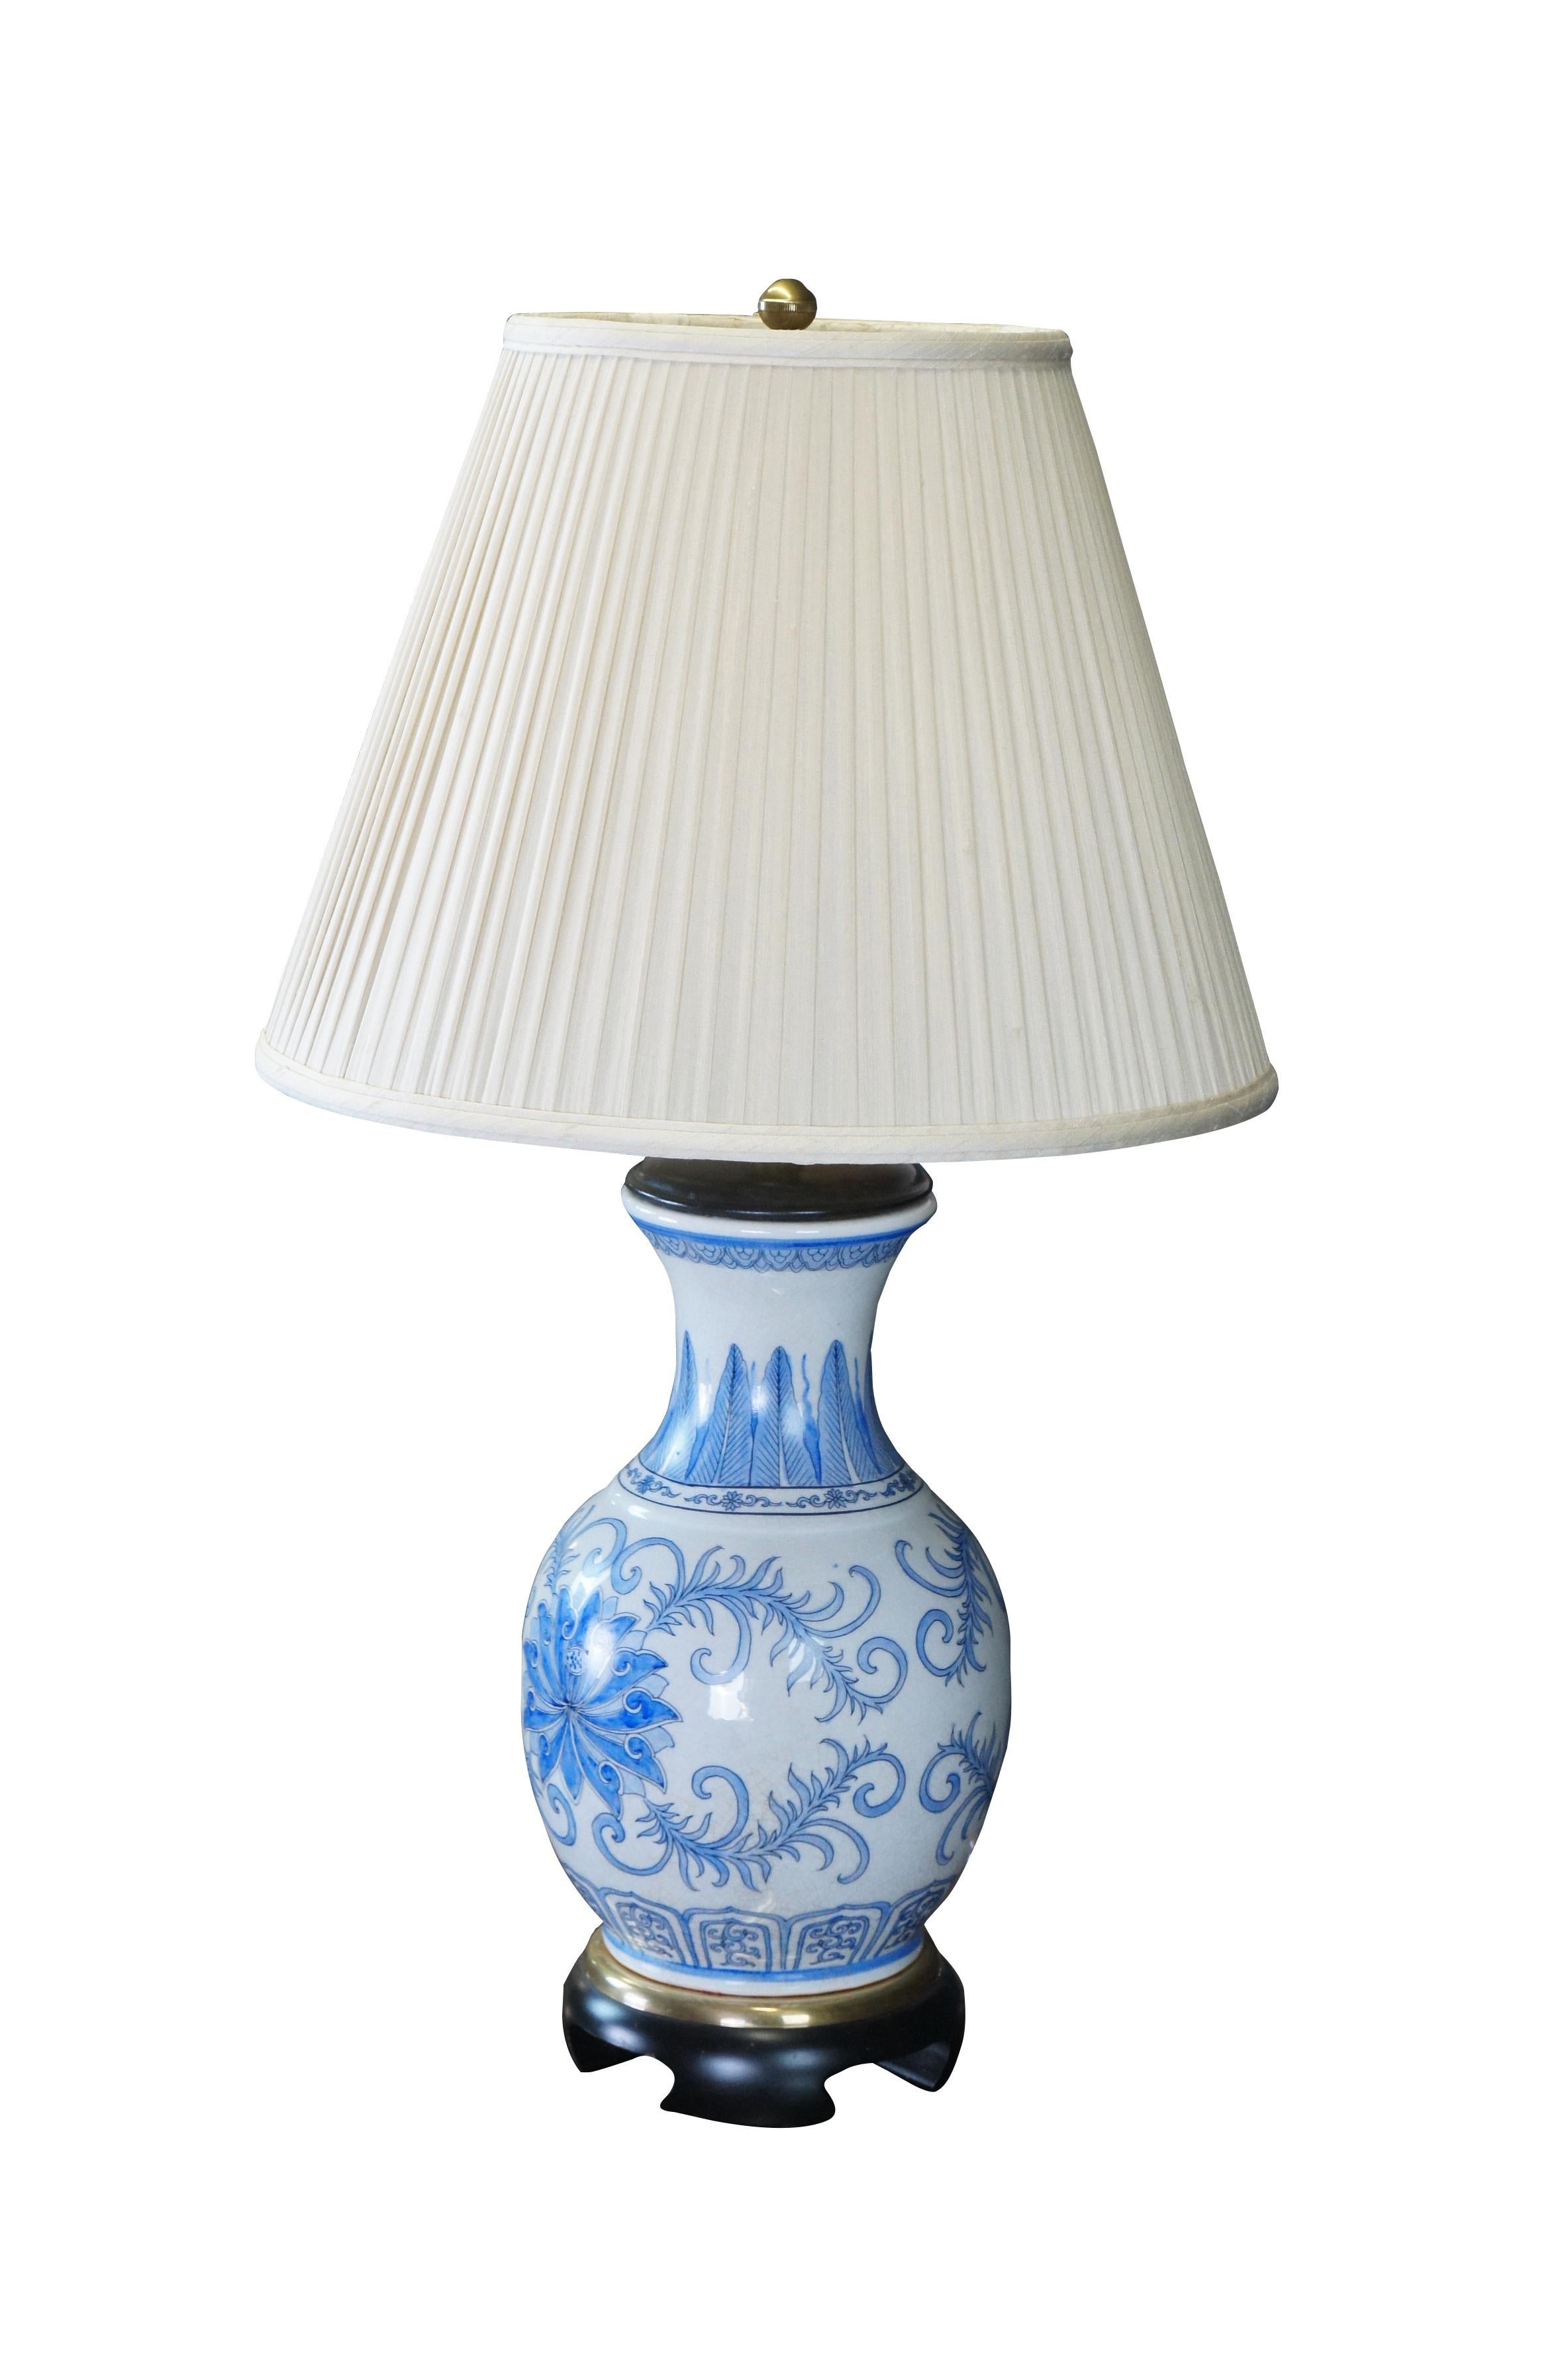 Vintage Frederick Cooper blue and white porcelain table lamp featuring a floral chinoiserie designed vase / urn / jar 

Dimensions:
31